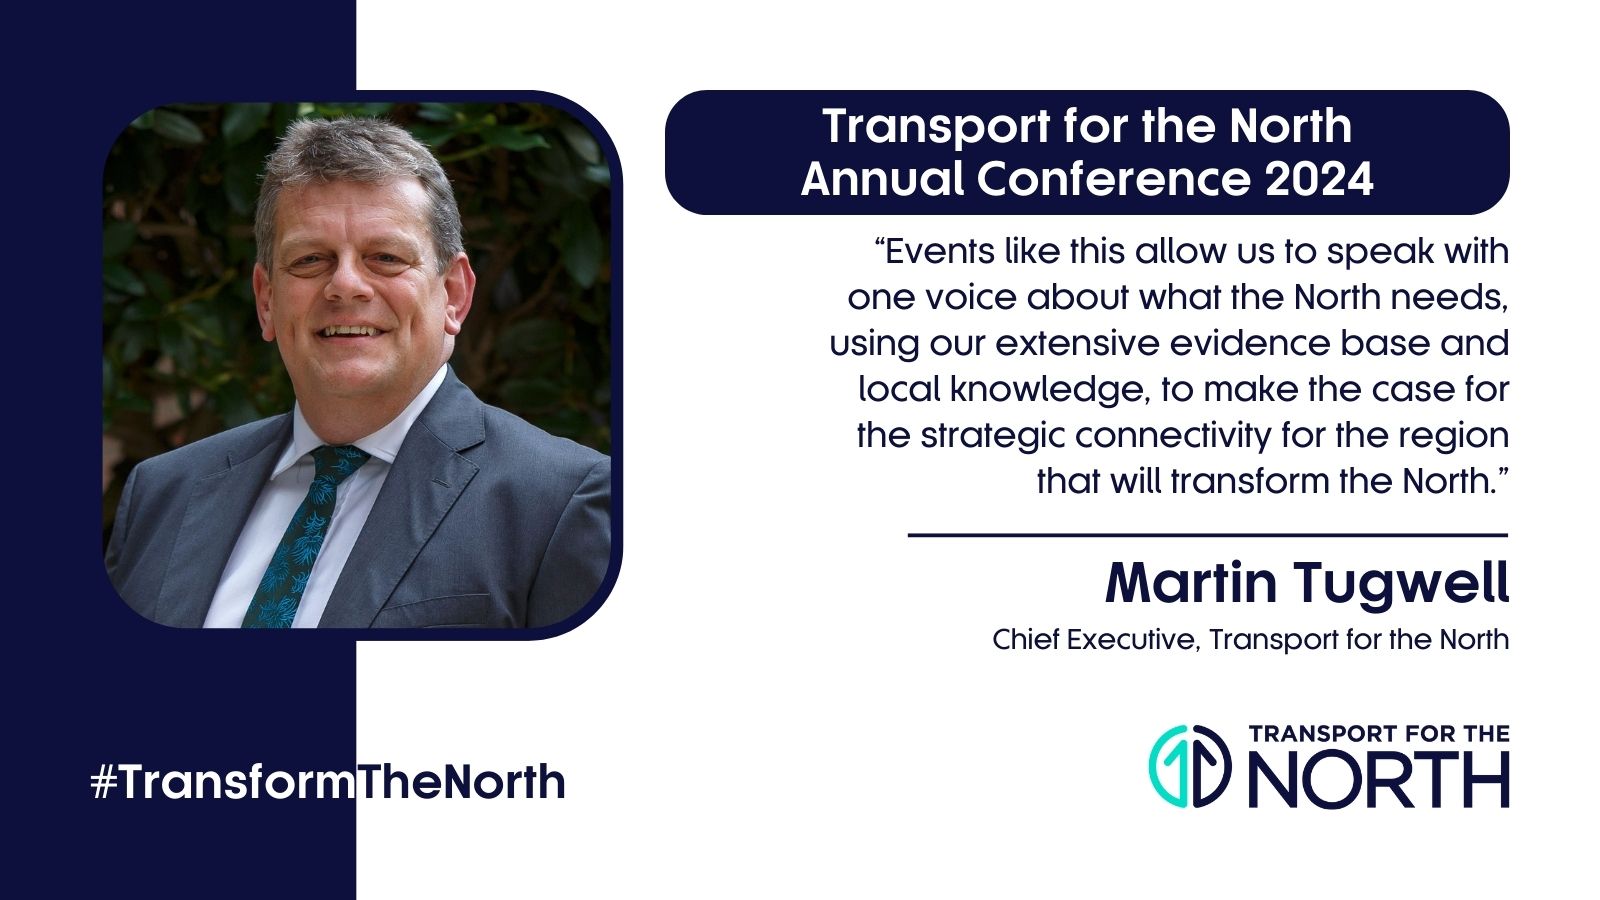 Martin Tugwell comments on TfN Annual Conference 2024 selling out